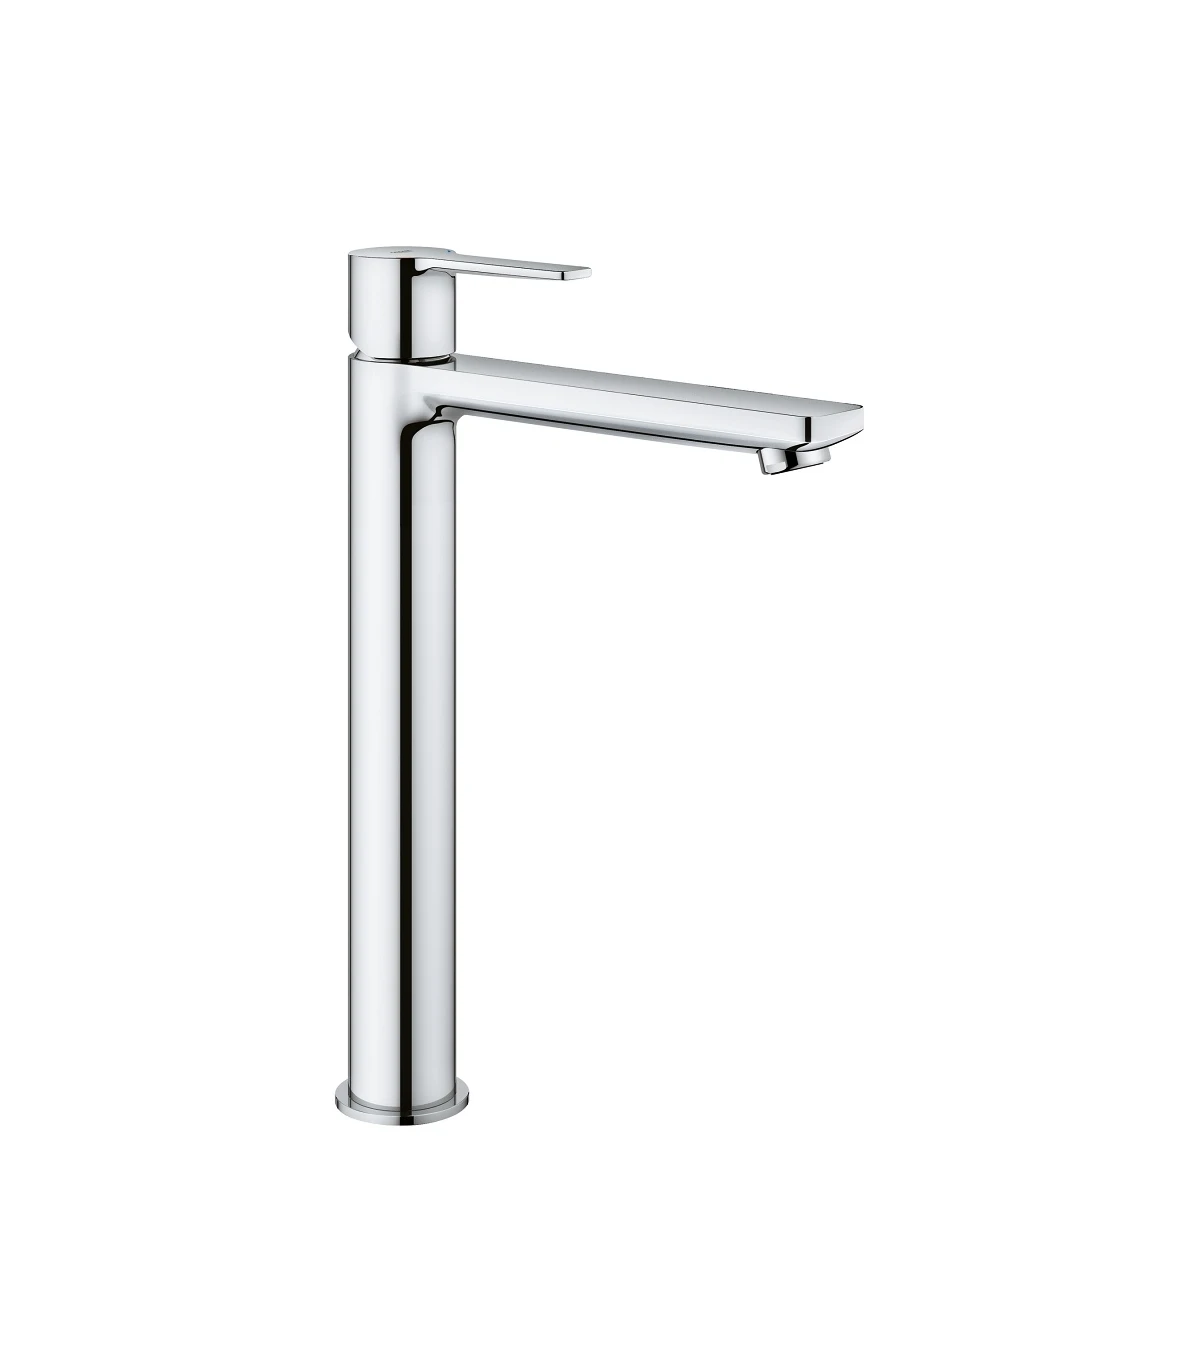 Mitigeur haut lavabo Grohe collection New